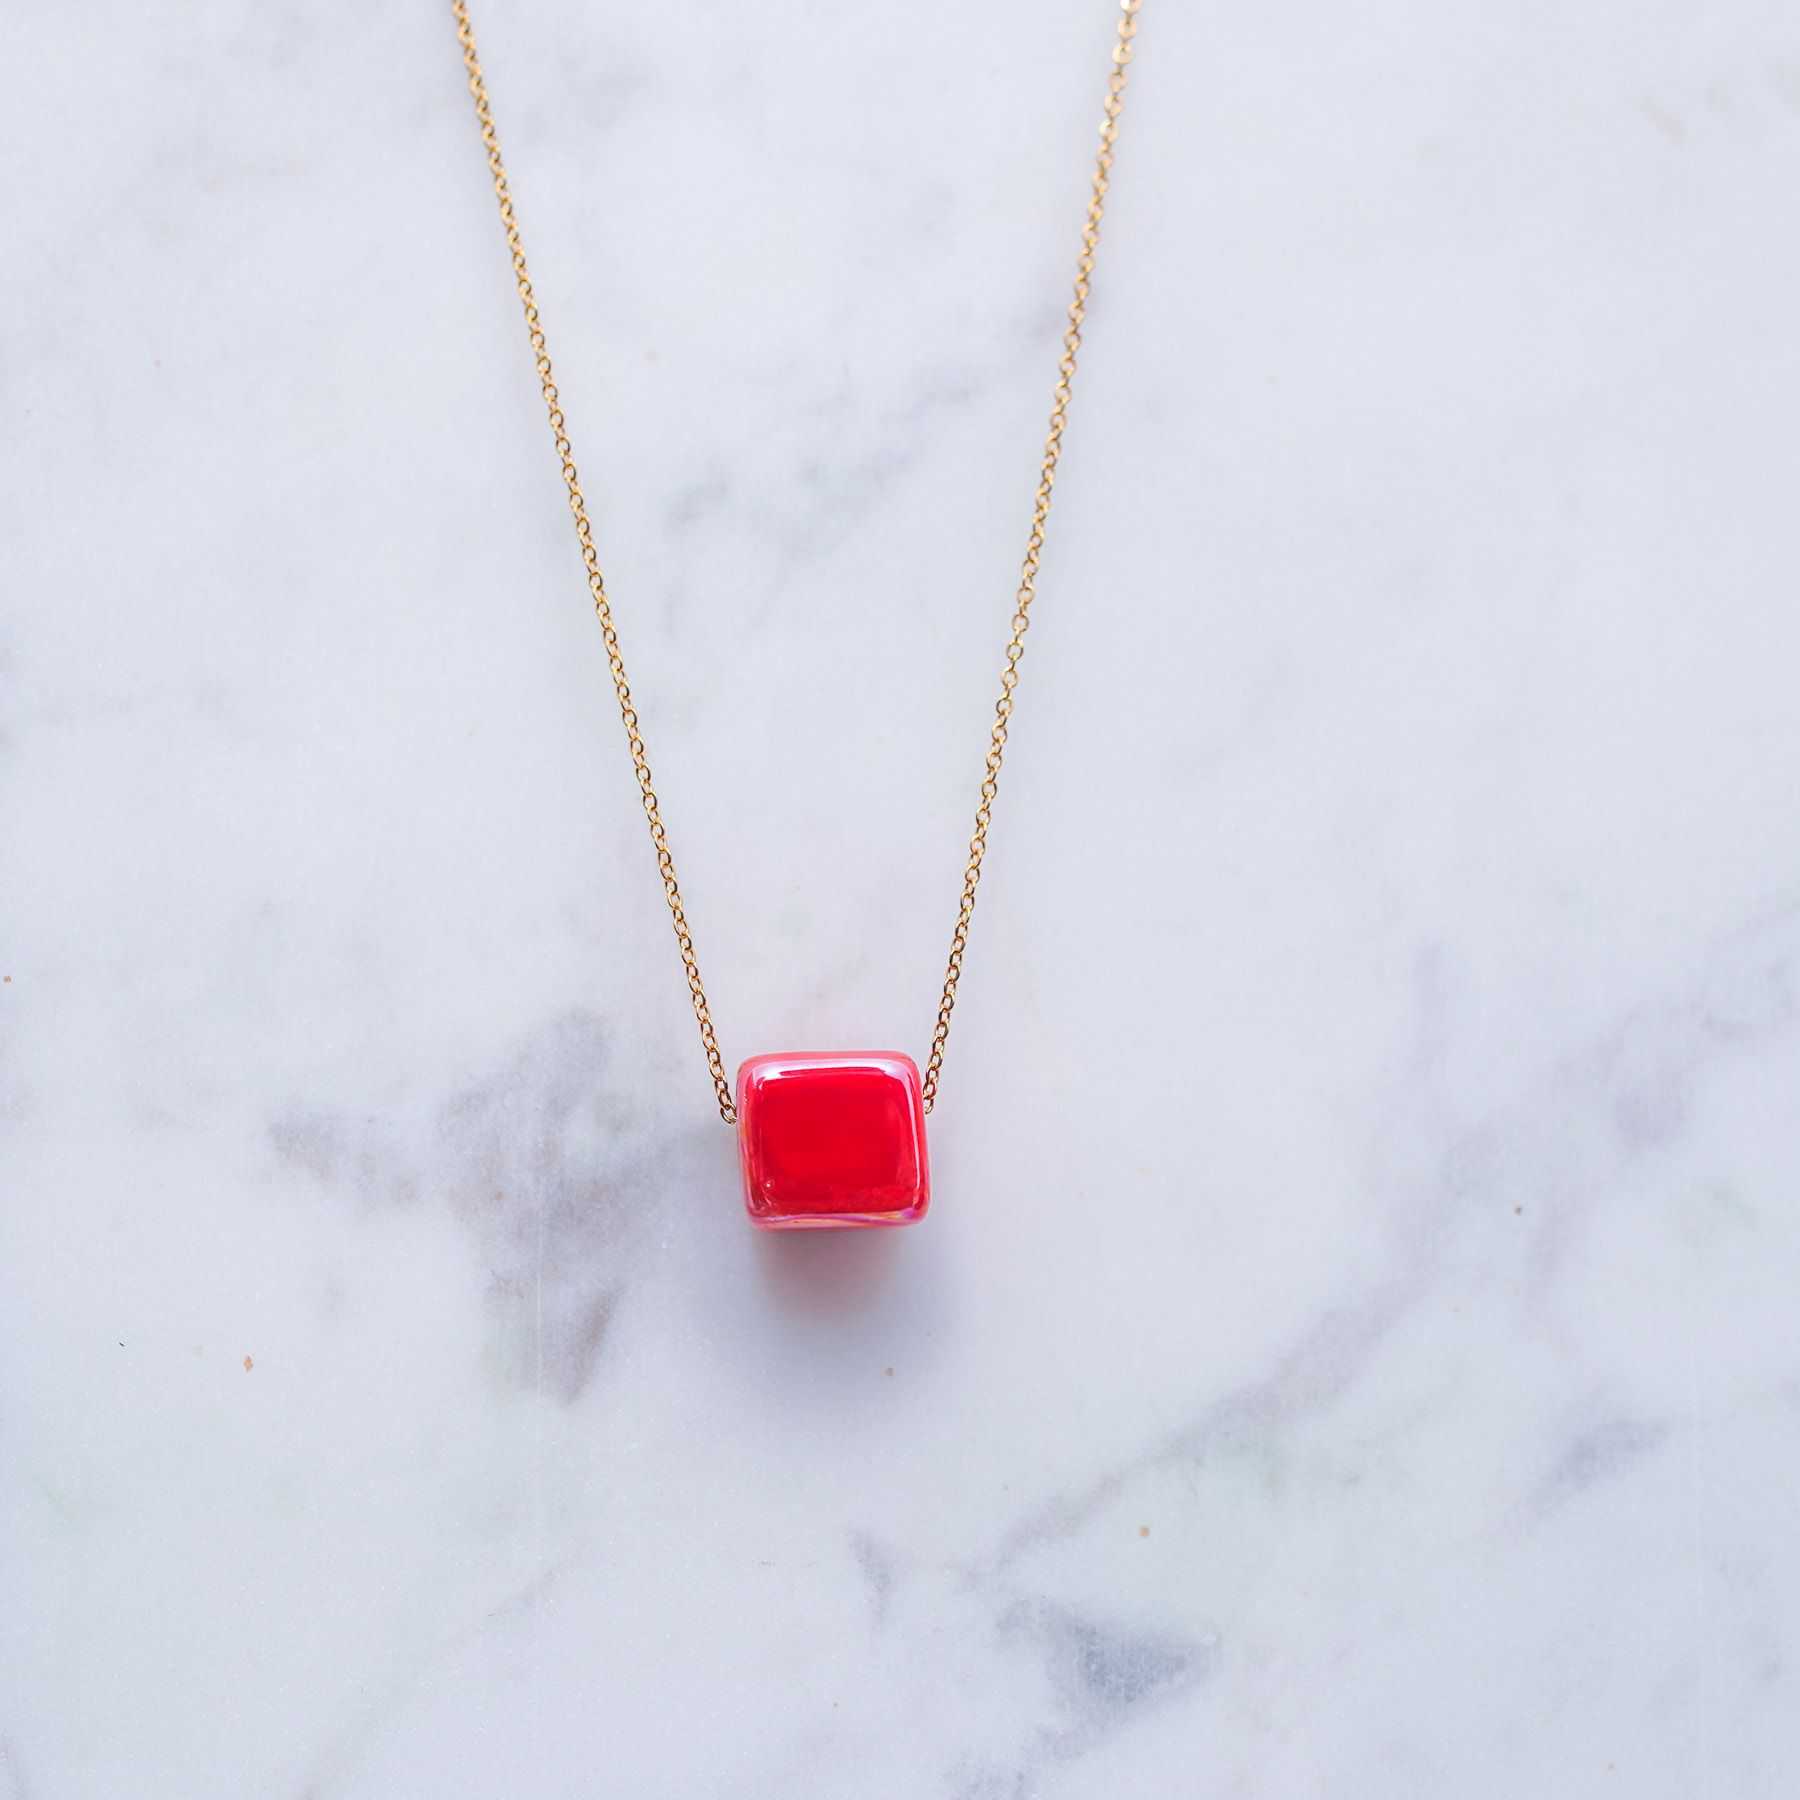 KIVOS NECKLACE - GOLD & PEARL RED